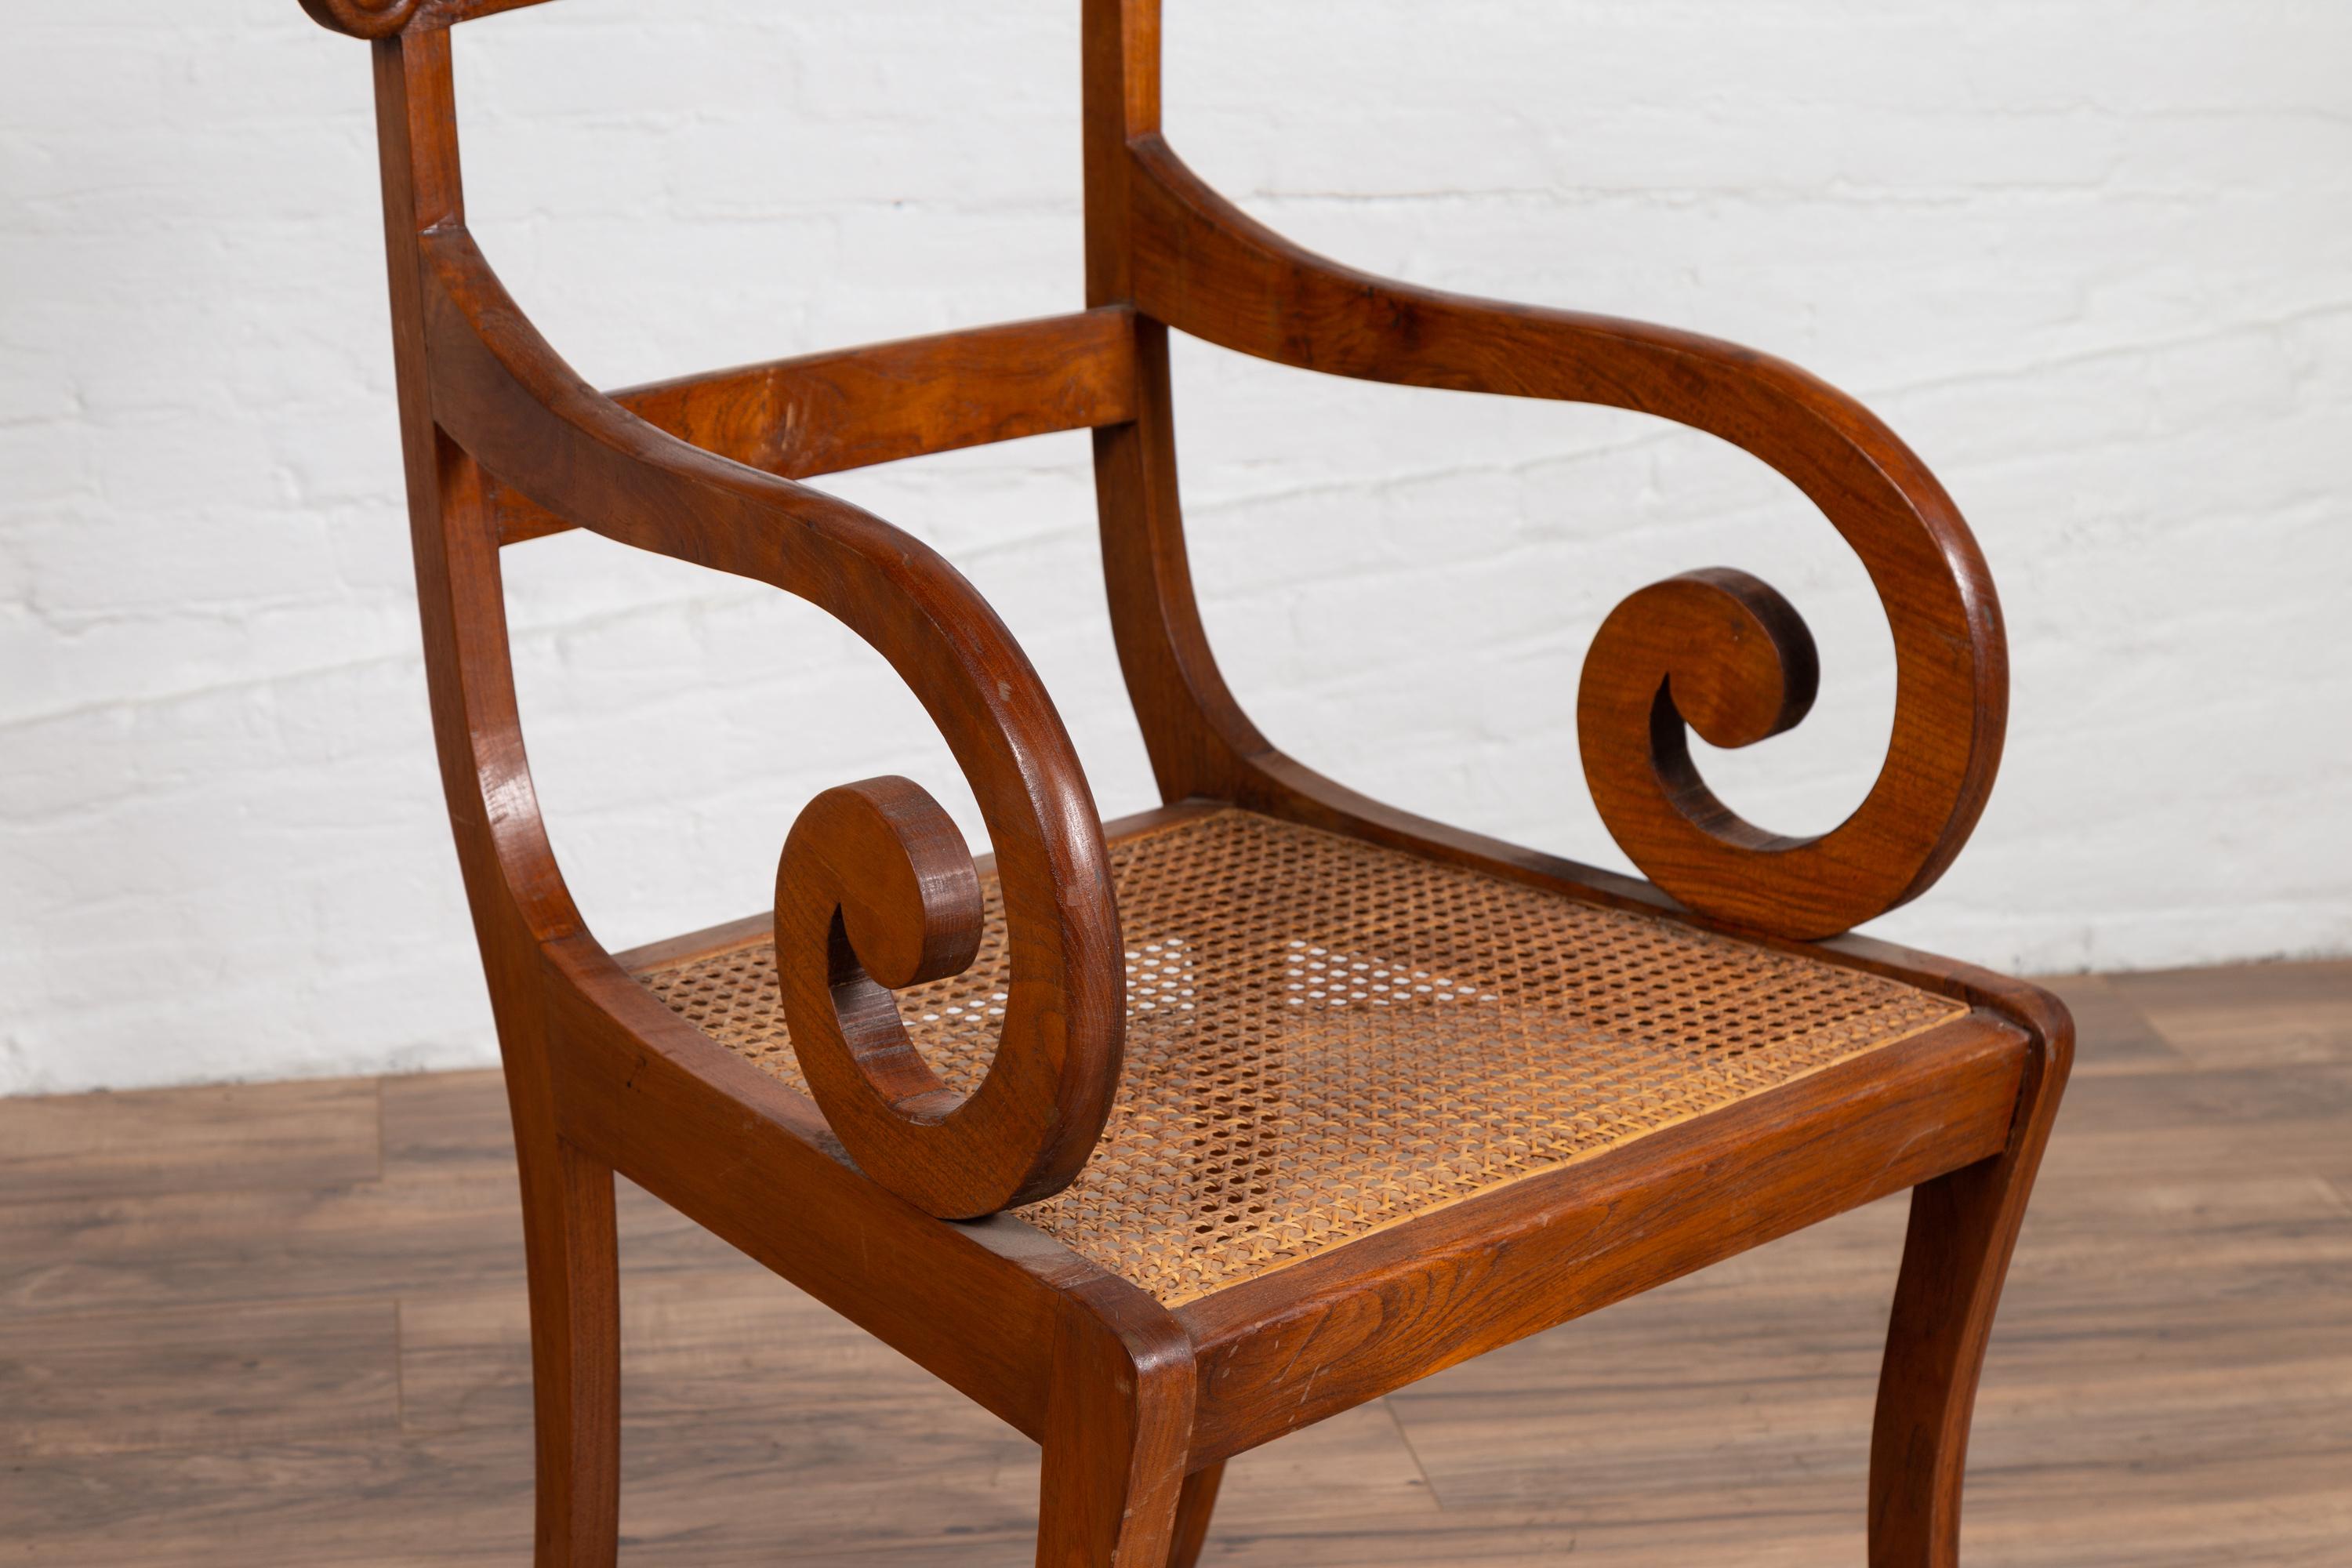 Wood Javanese Antique Armchair with Carved Rail, Woven Rattan Seat and Curving Arms